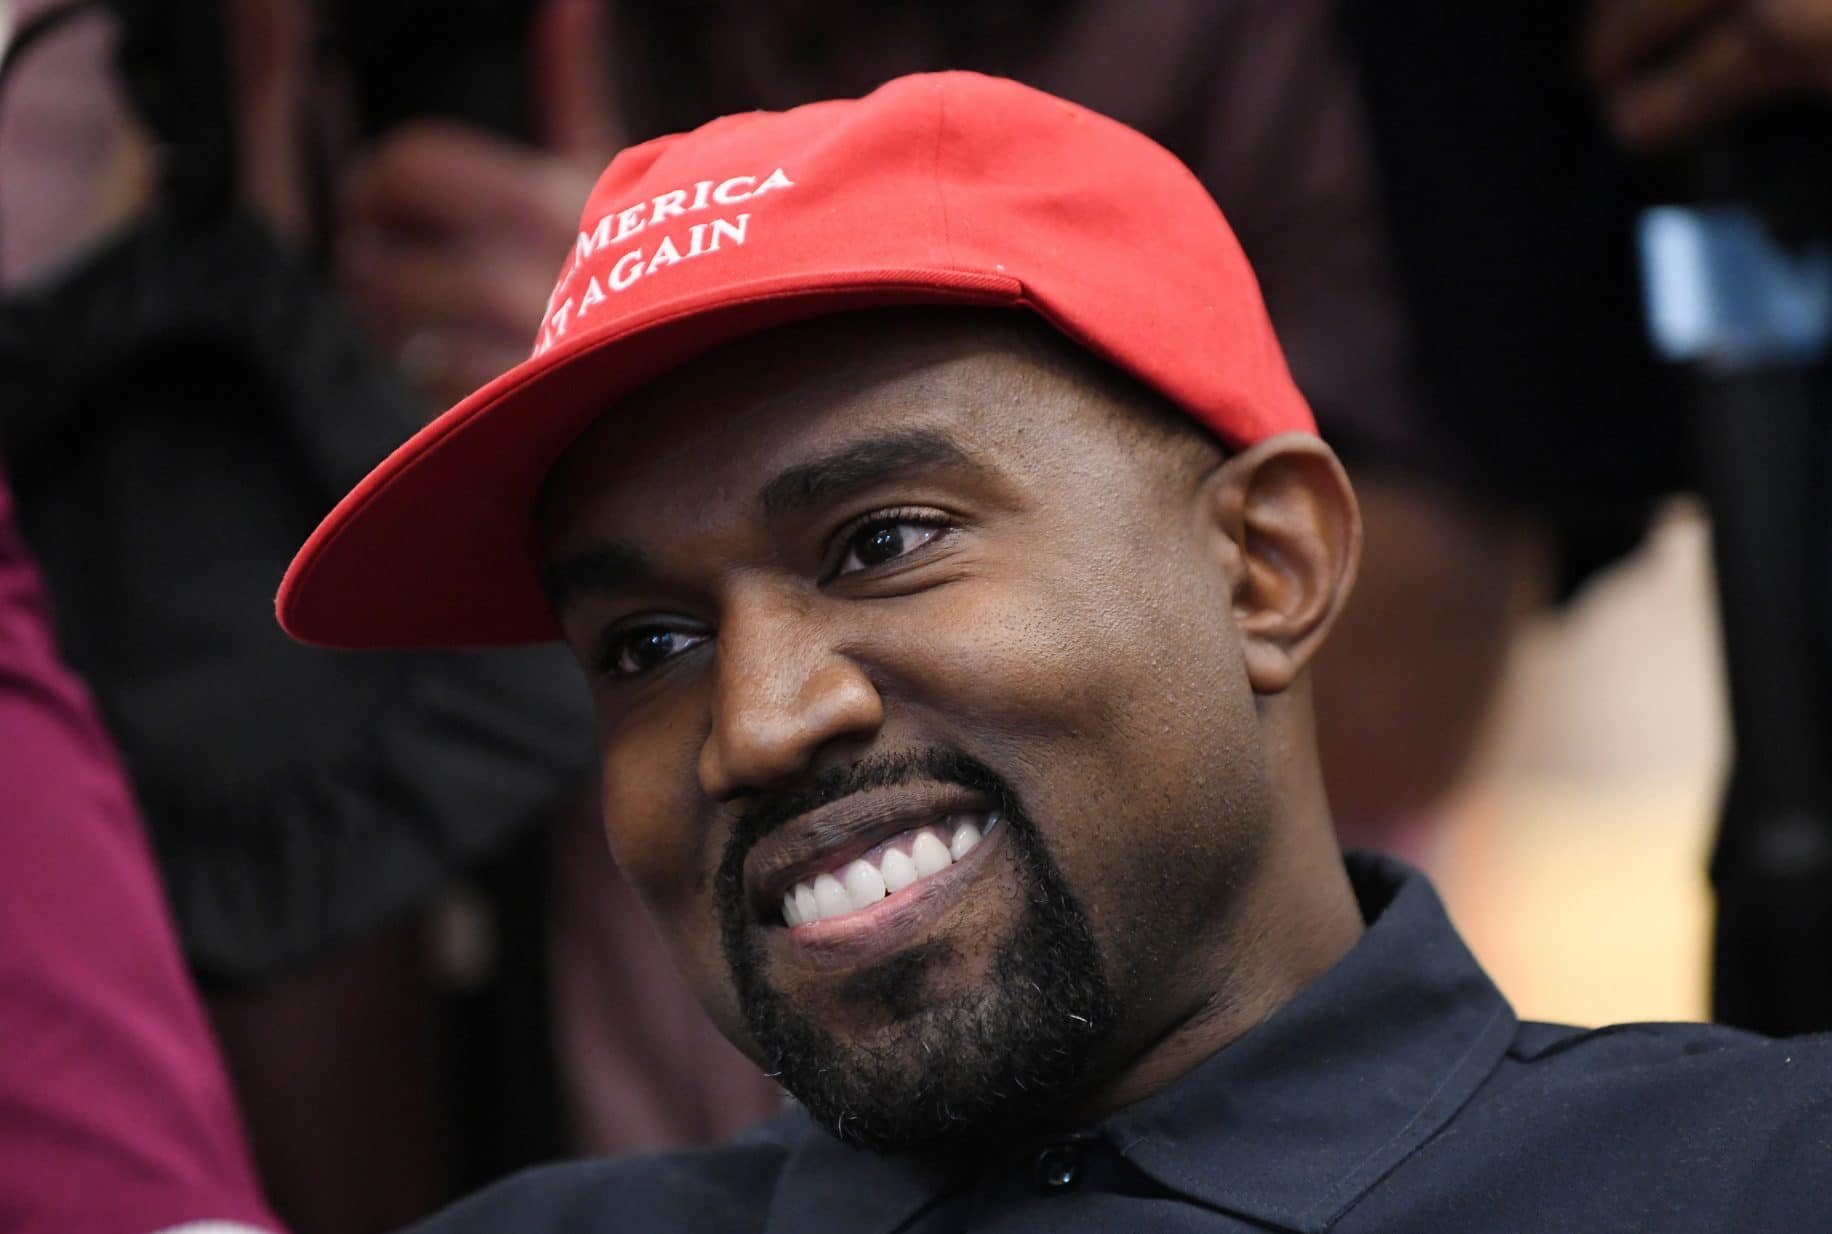 Kanye West says he's running for president in 2024